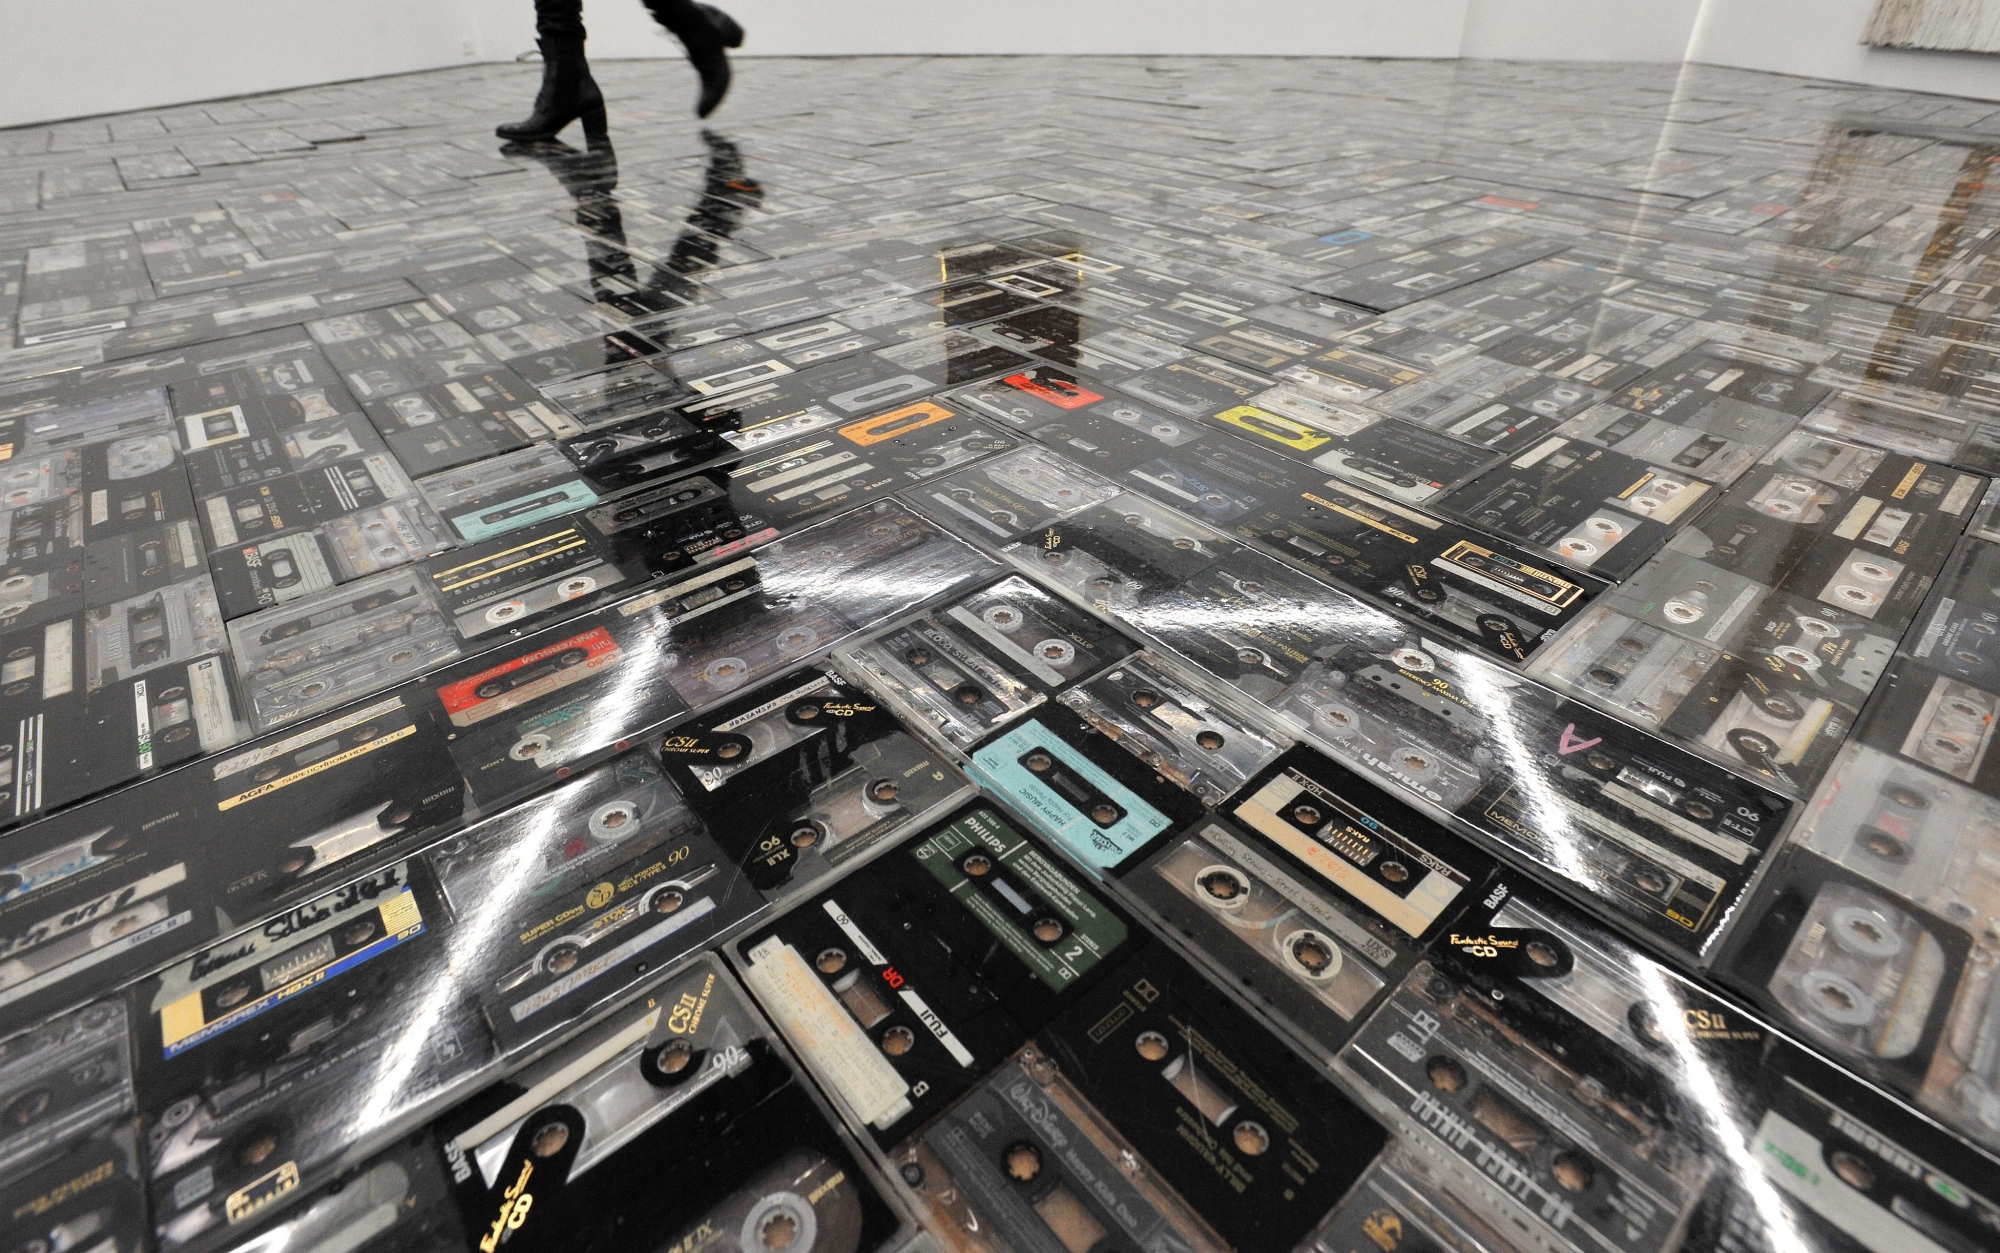 epa04027330 A view of a floor made up of cassette tapes as part of a show by German artist Gregor Hildebrandt called 'Die Geschichte laeuft ueber uns' (lit: The Story Runs About Us) at the Galerie Perrotin in New York, New York, USA, 17 January 2014. The show is made up of a series of pieces using a number of analog technologies.  EPA/JUSTIN LANE USA ARTS